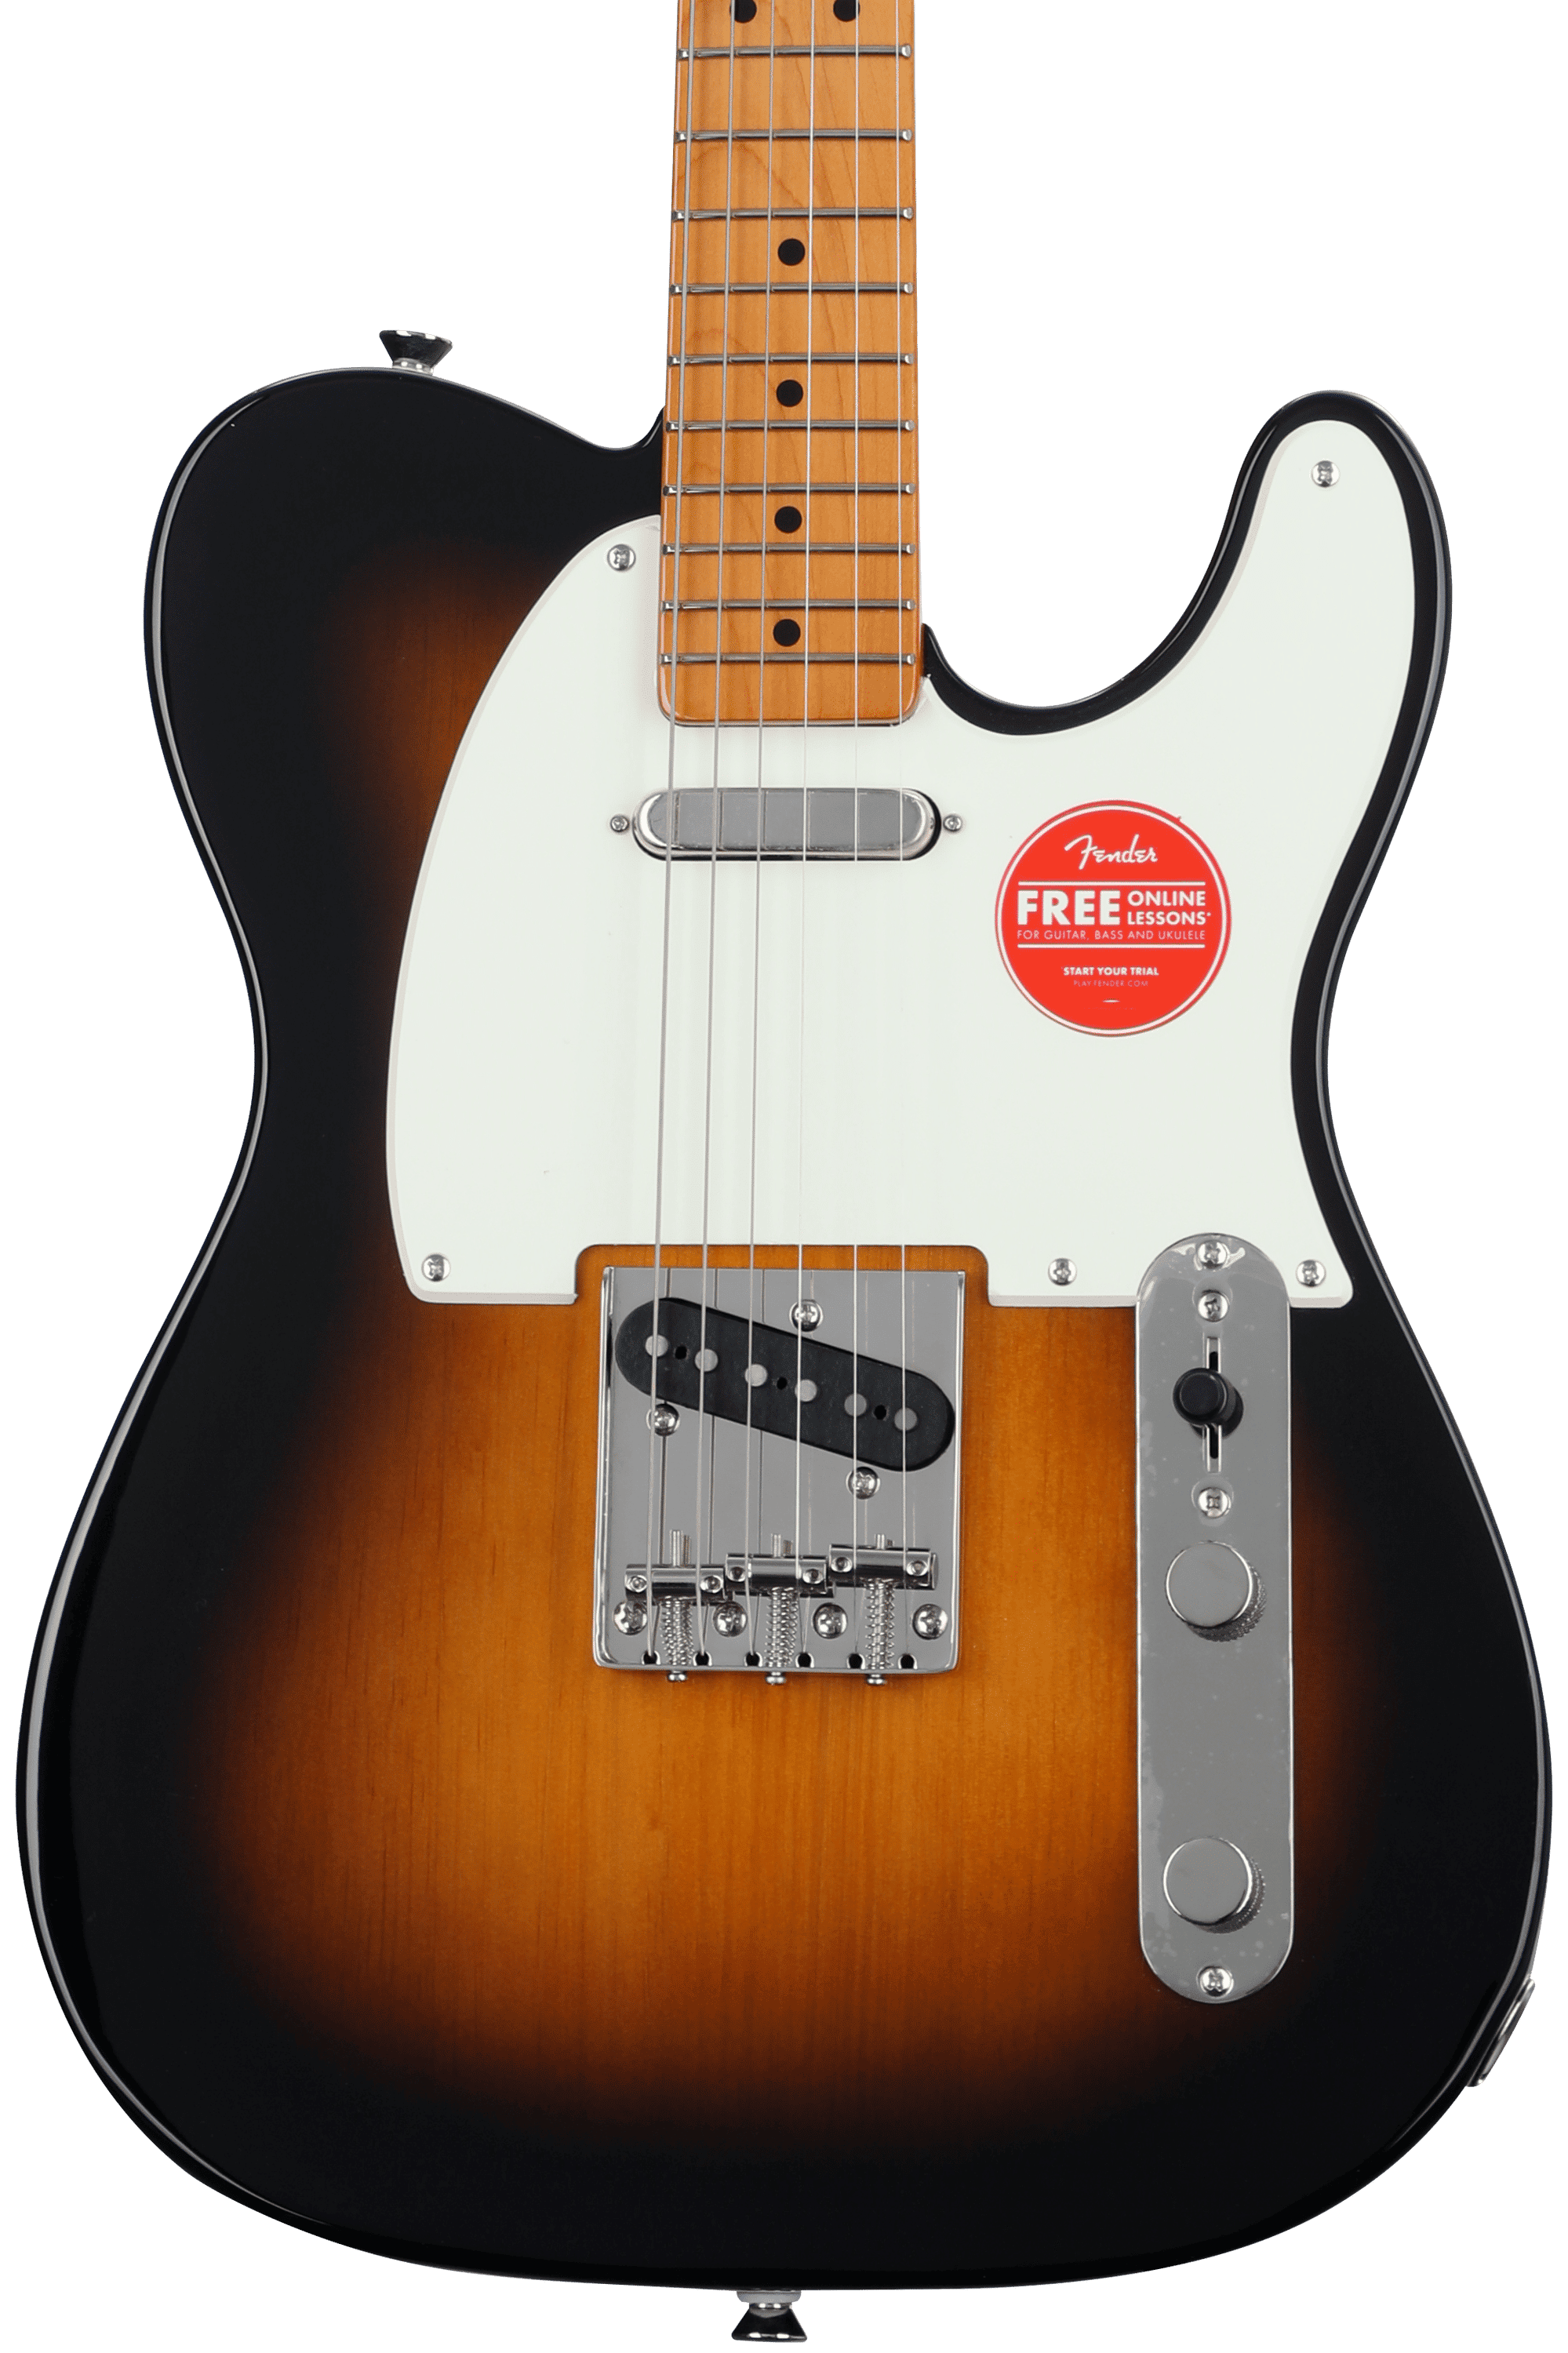 Squier Classic Vibe '50s Telecaster - 2-color Sunburst, Sweetwater Exclusive